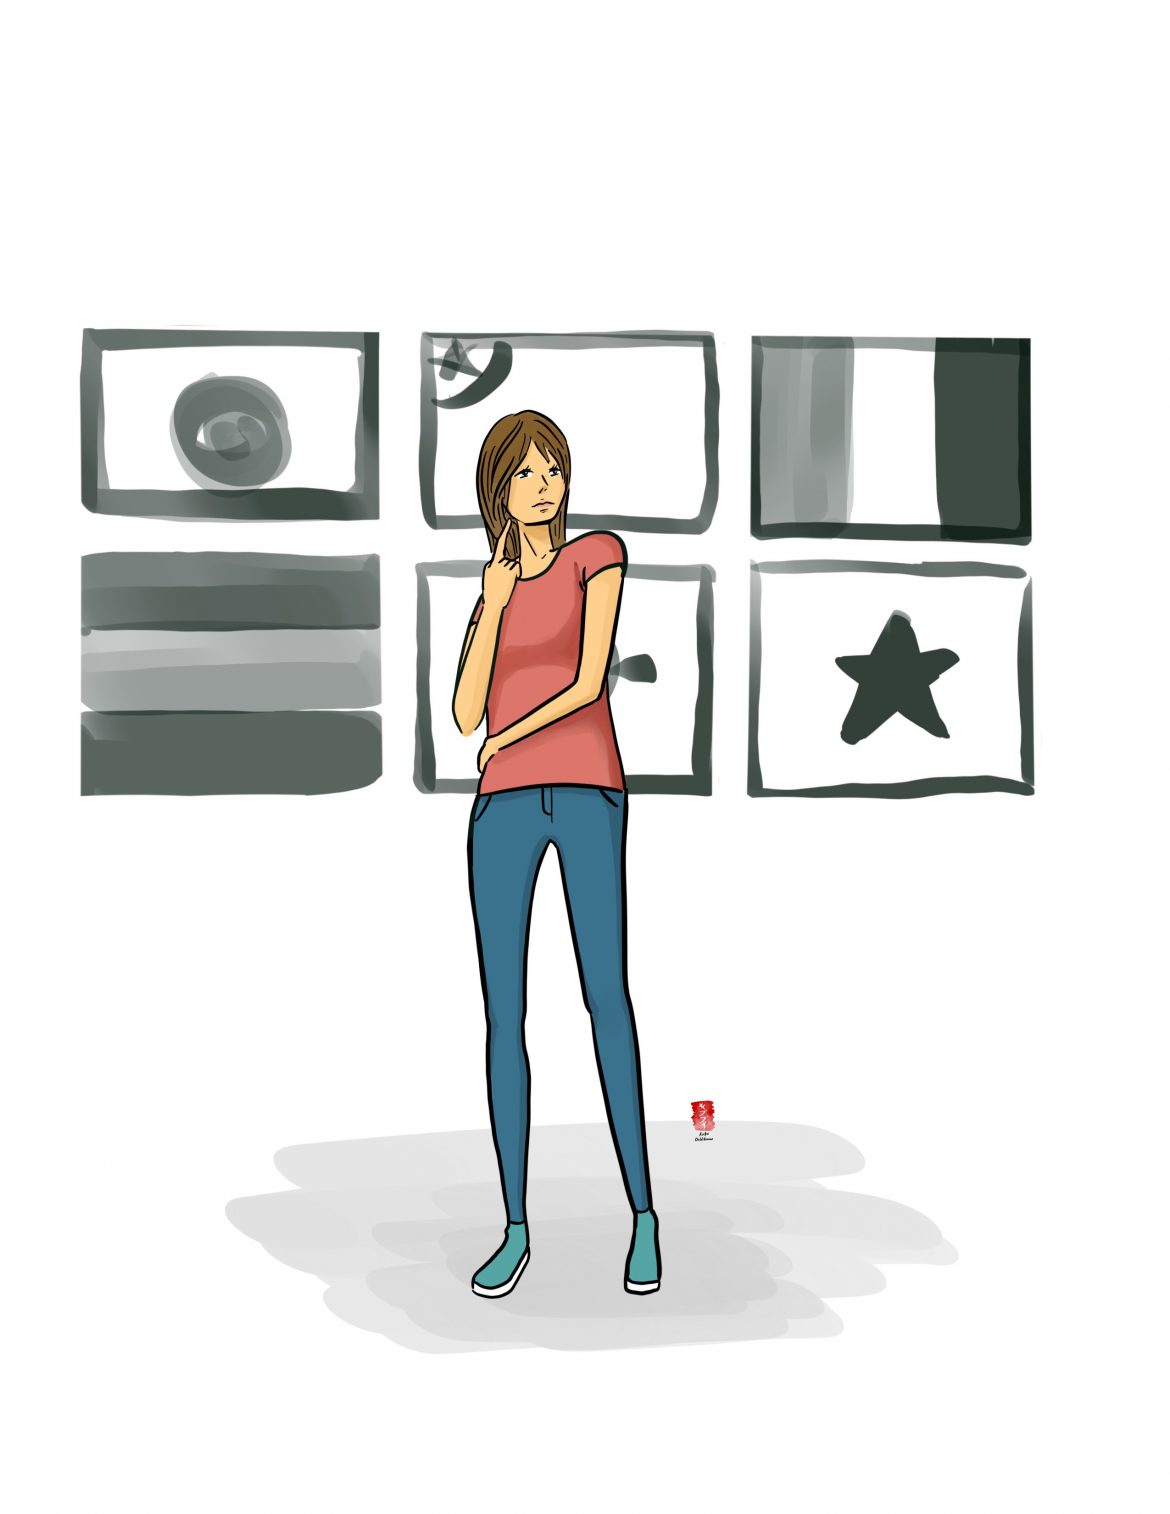 Illustration+shows+a+woman+standing+in+front+of+various+countries+flags